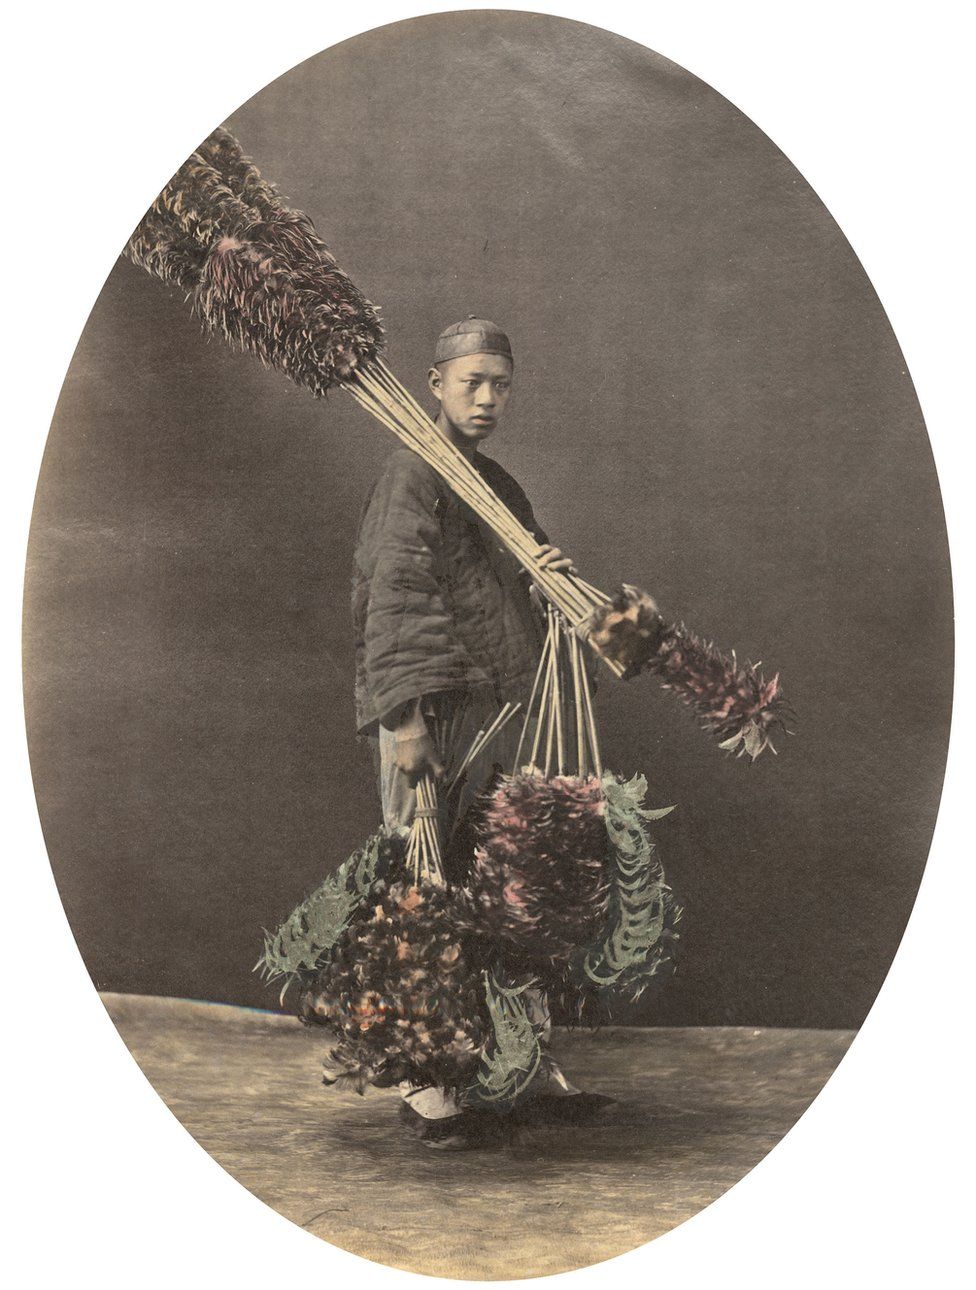 William Saunders, The Brush Seller, 1860s - 1870s. Hand-tinted albumen silver print. No. 23 in Sketches of Chinese Life and Character series